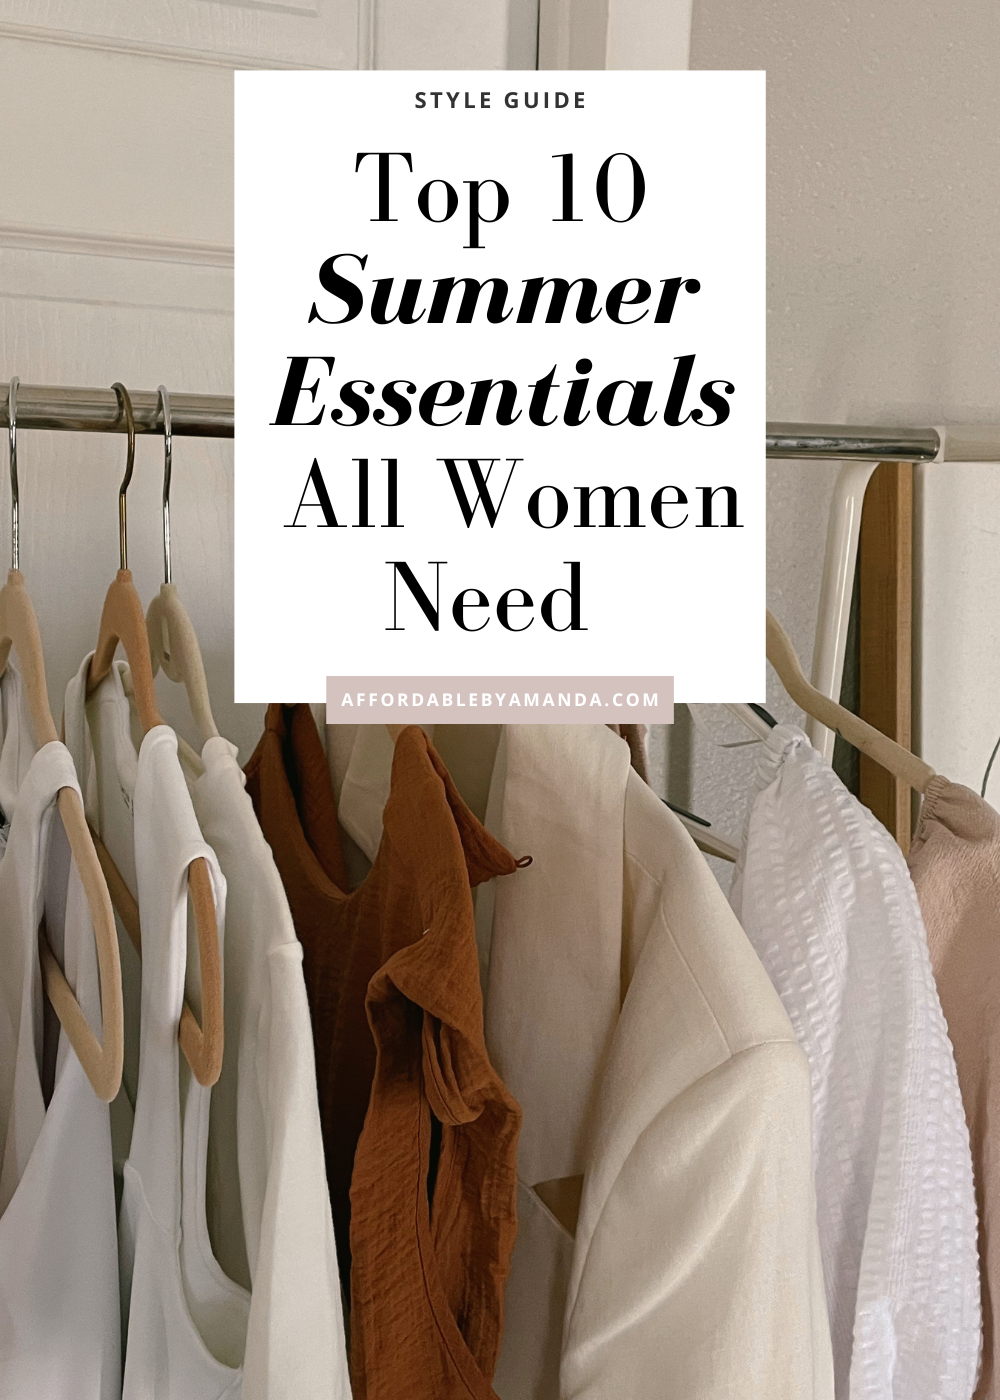 Tasteful Adulting: 10 Wardrobe Essentials For the Modern Lady (from the  Nordstrom Sale!)